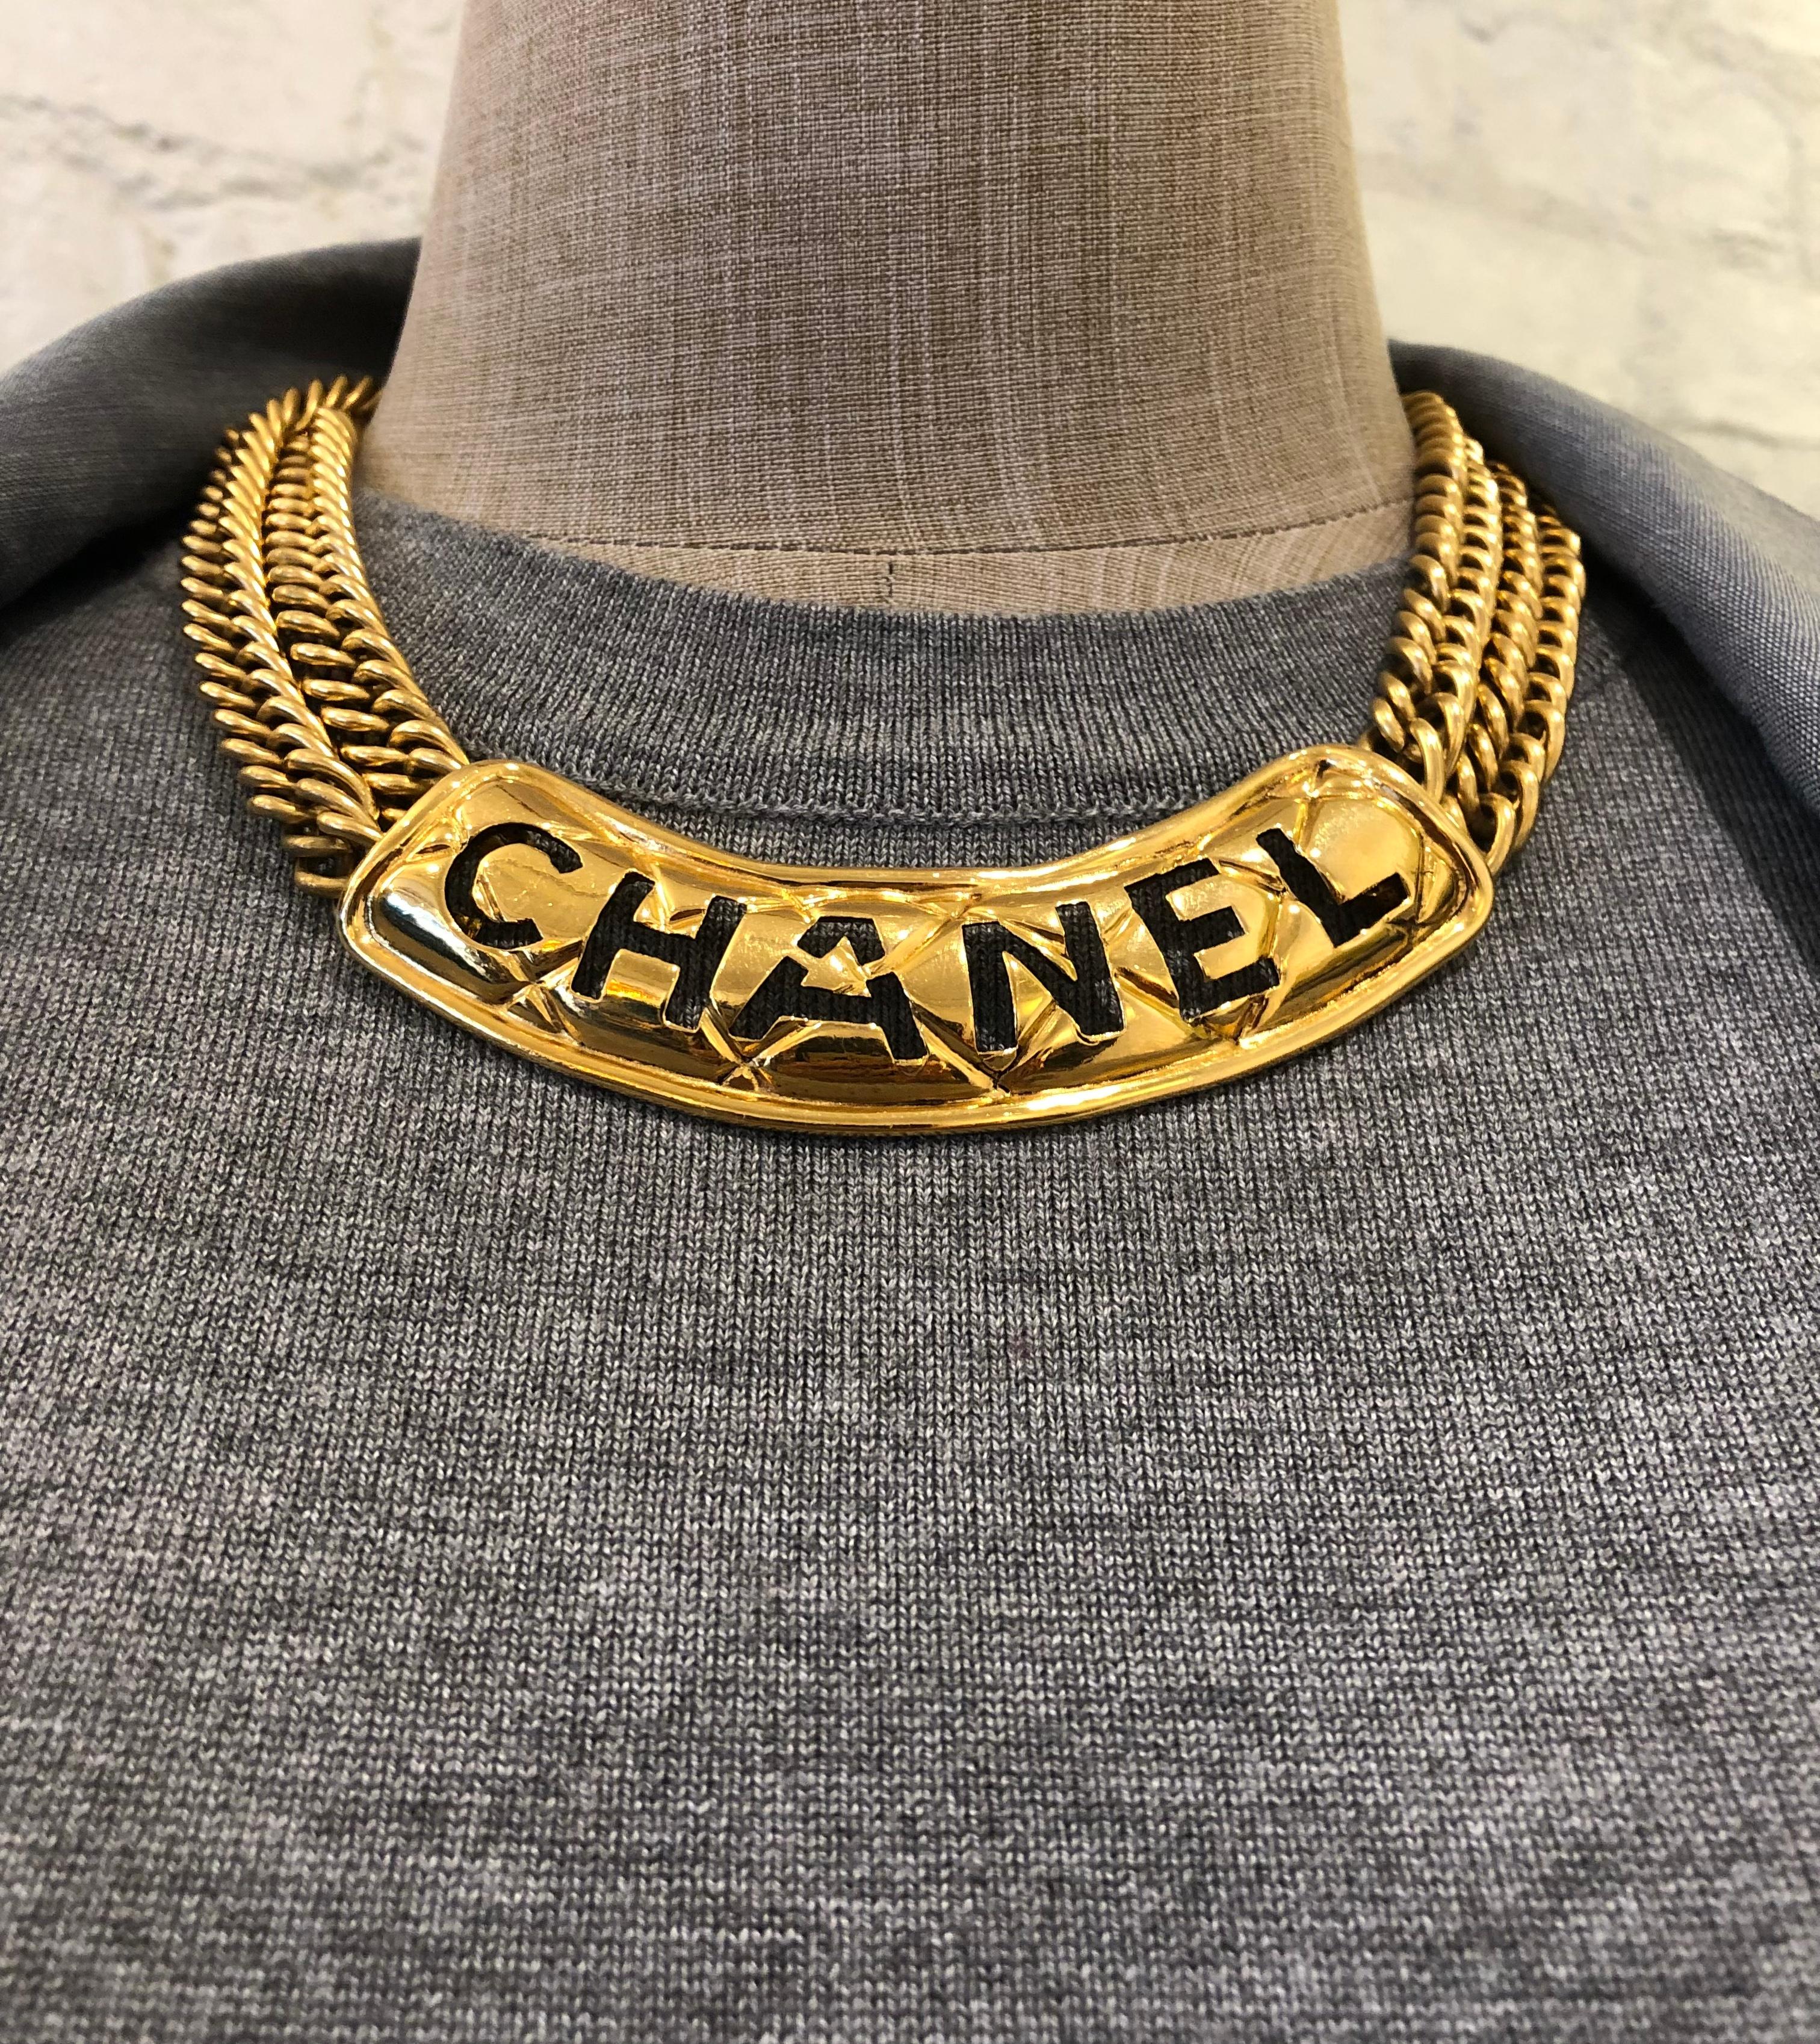 1980s Vintage CHANEL Gold Toned Cut Out Letter Chain Necklace For Sale 1